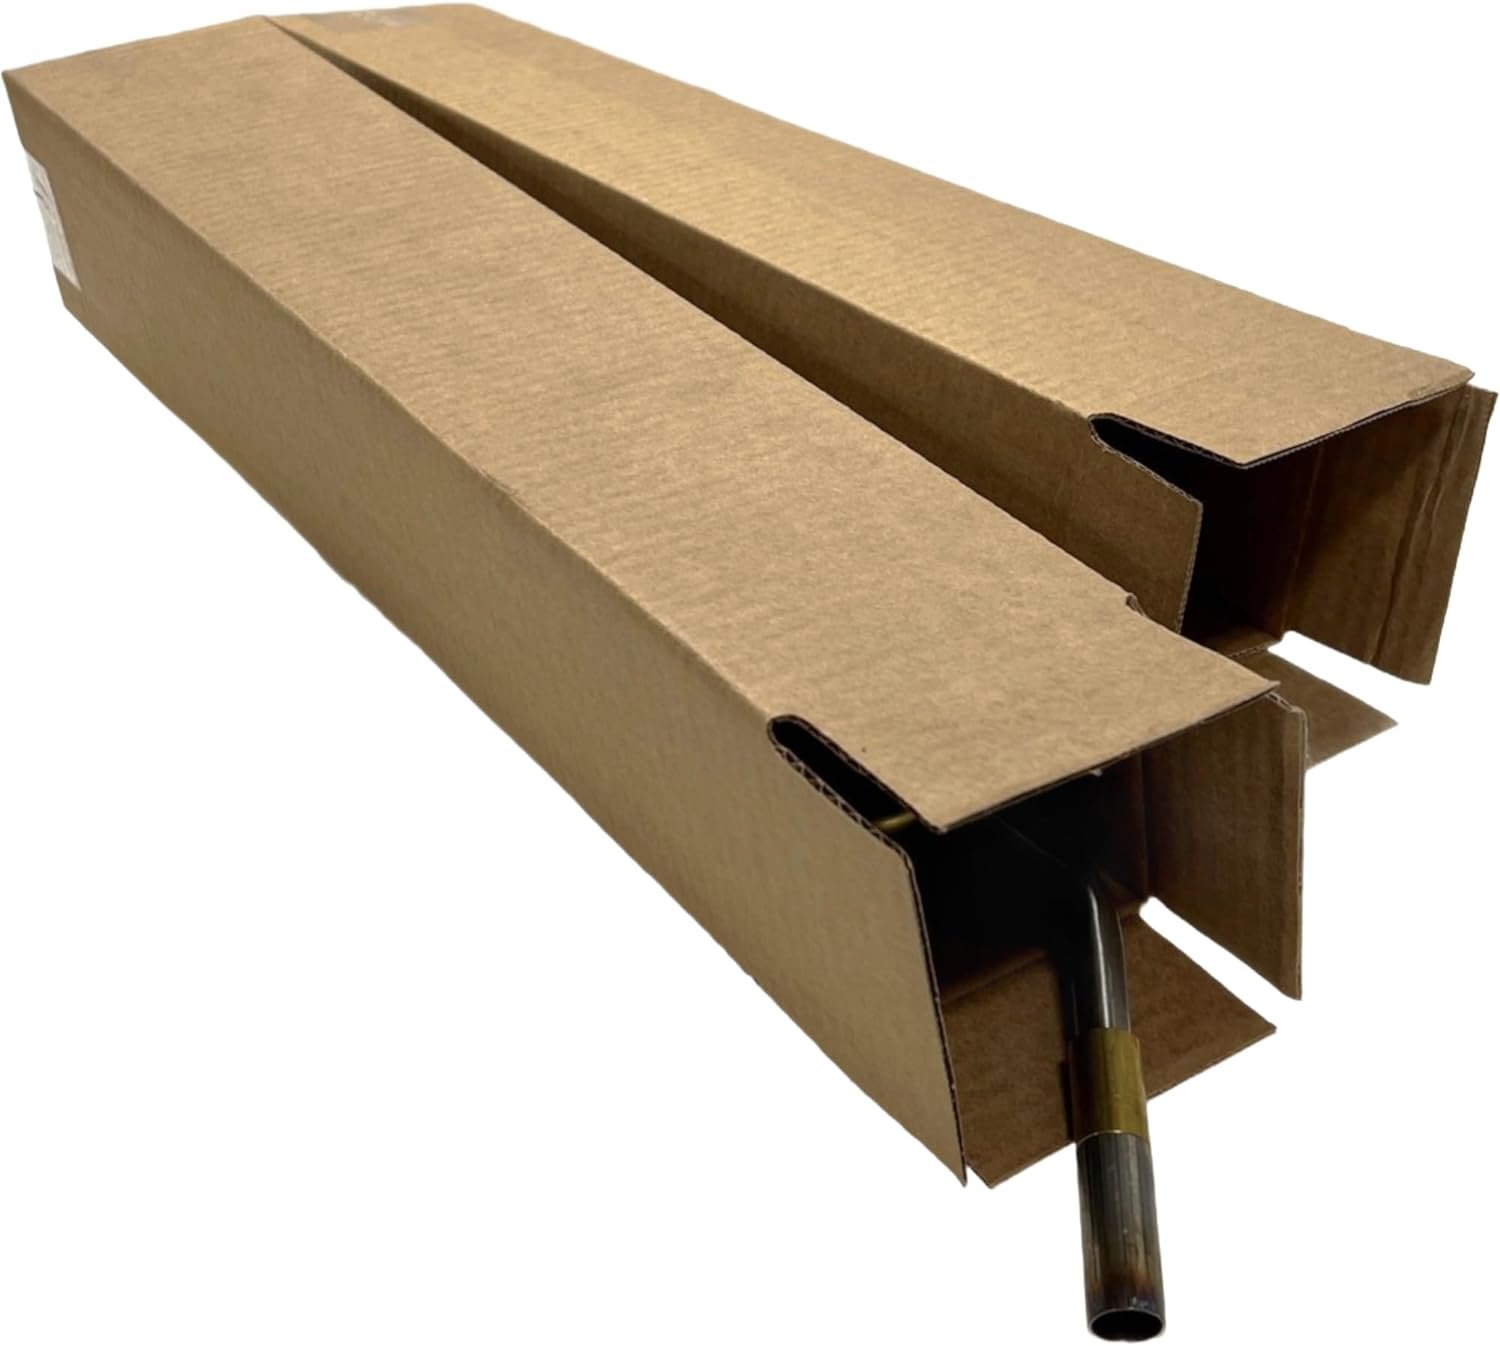 50 4x4x48 Cardboard Paper Boxes Mailing Packing Shipping Box Corrugated Carton